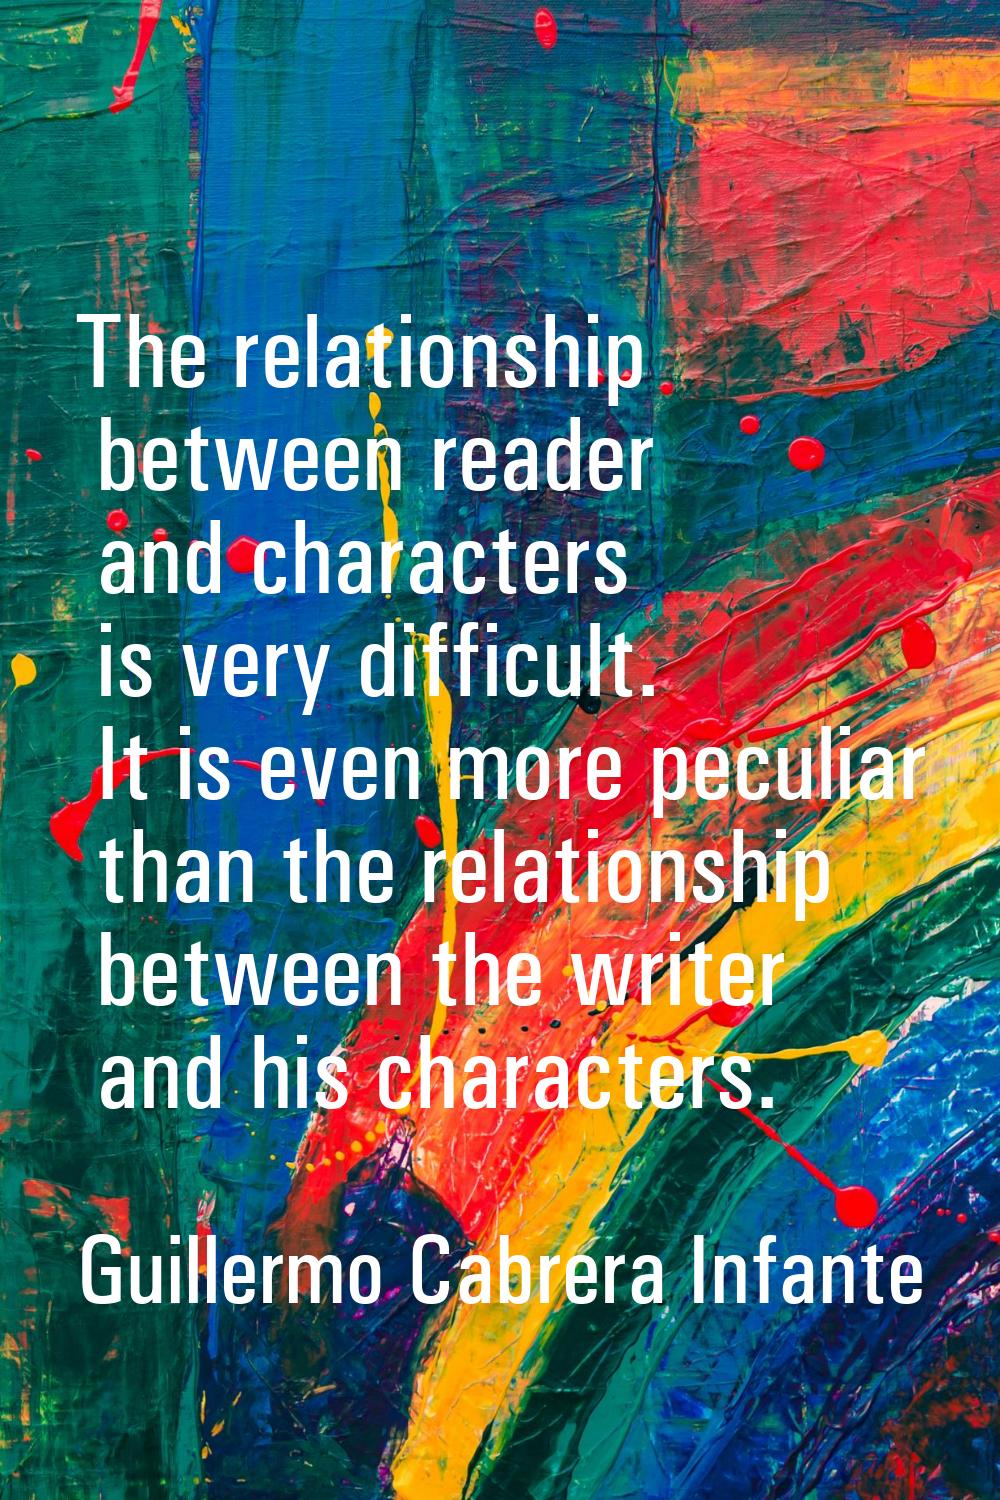 The relationship between reader and characters is very difficult. It is even more peculiar than the